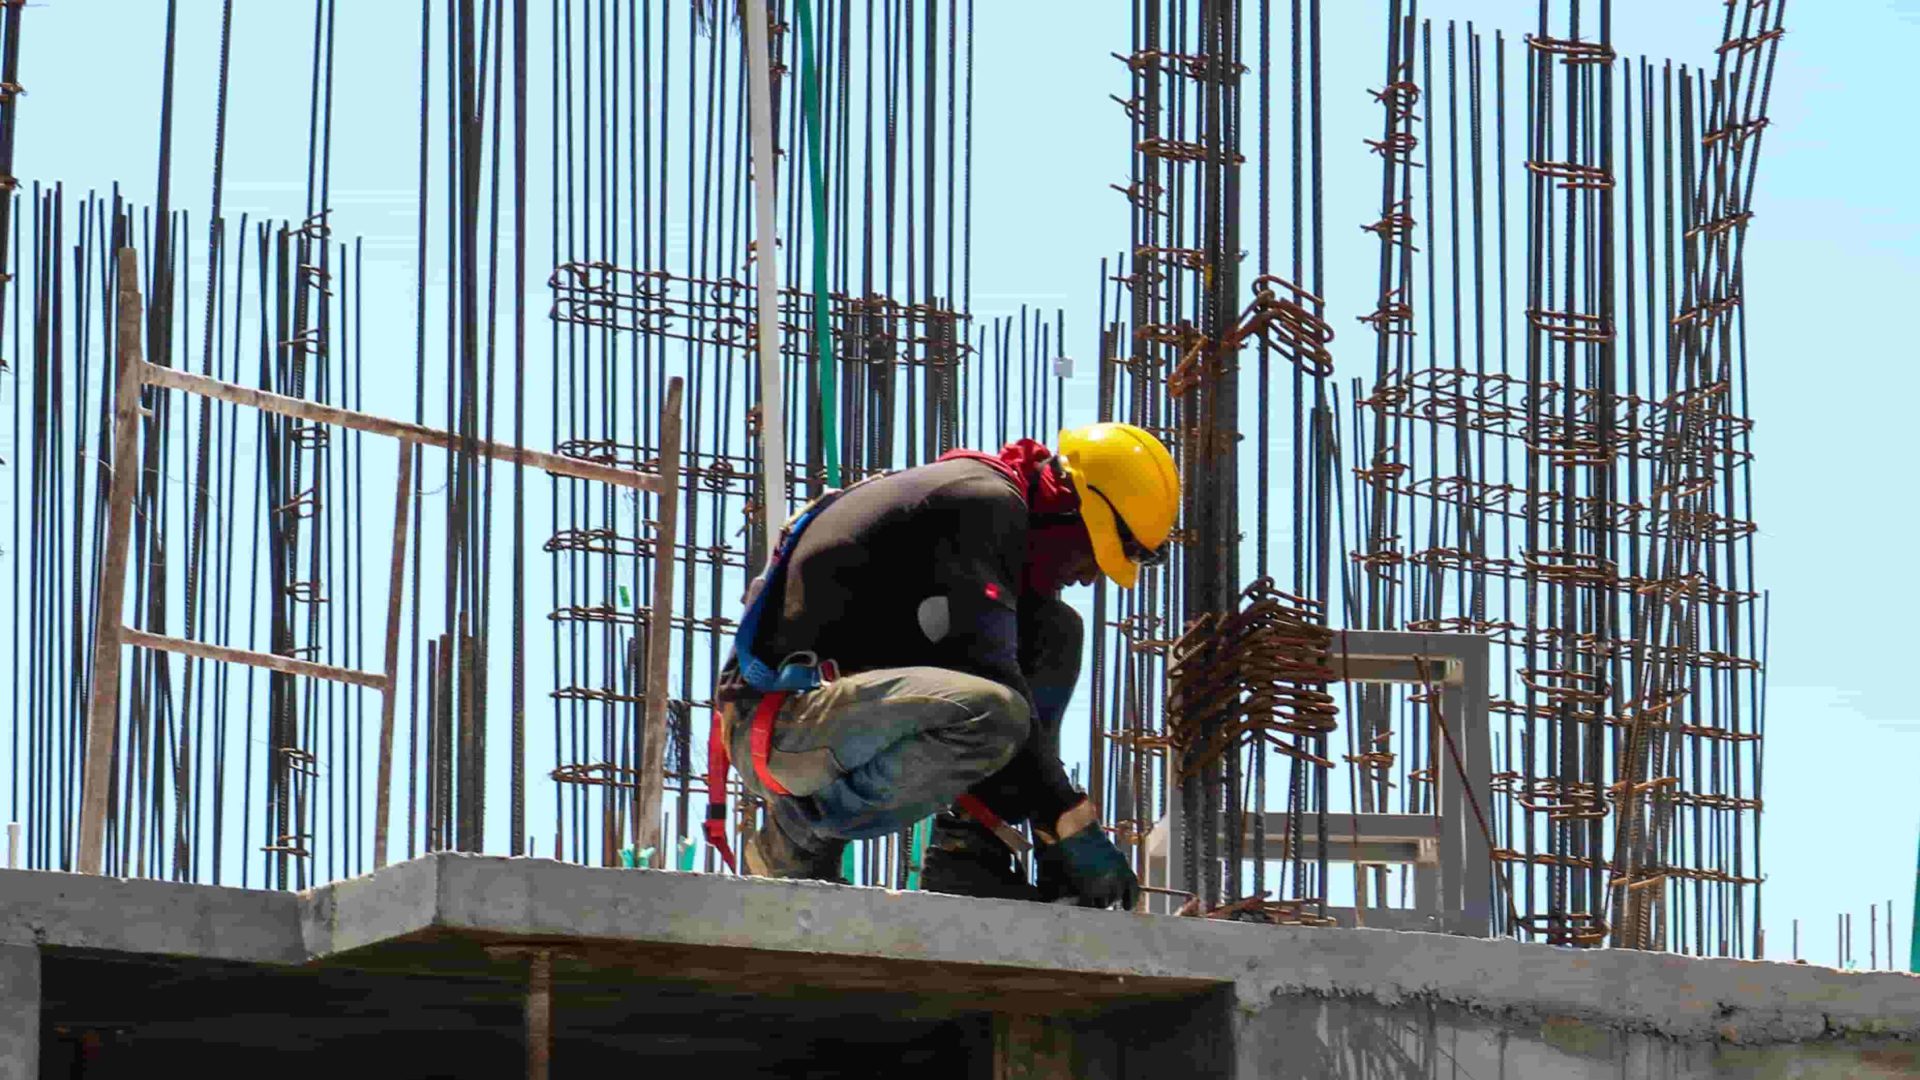 Foreign Labour Market for Bangladeshis: Sustainability Through Skilled Labour